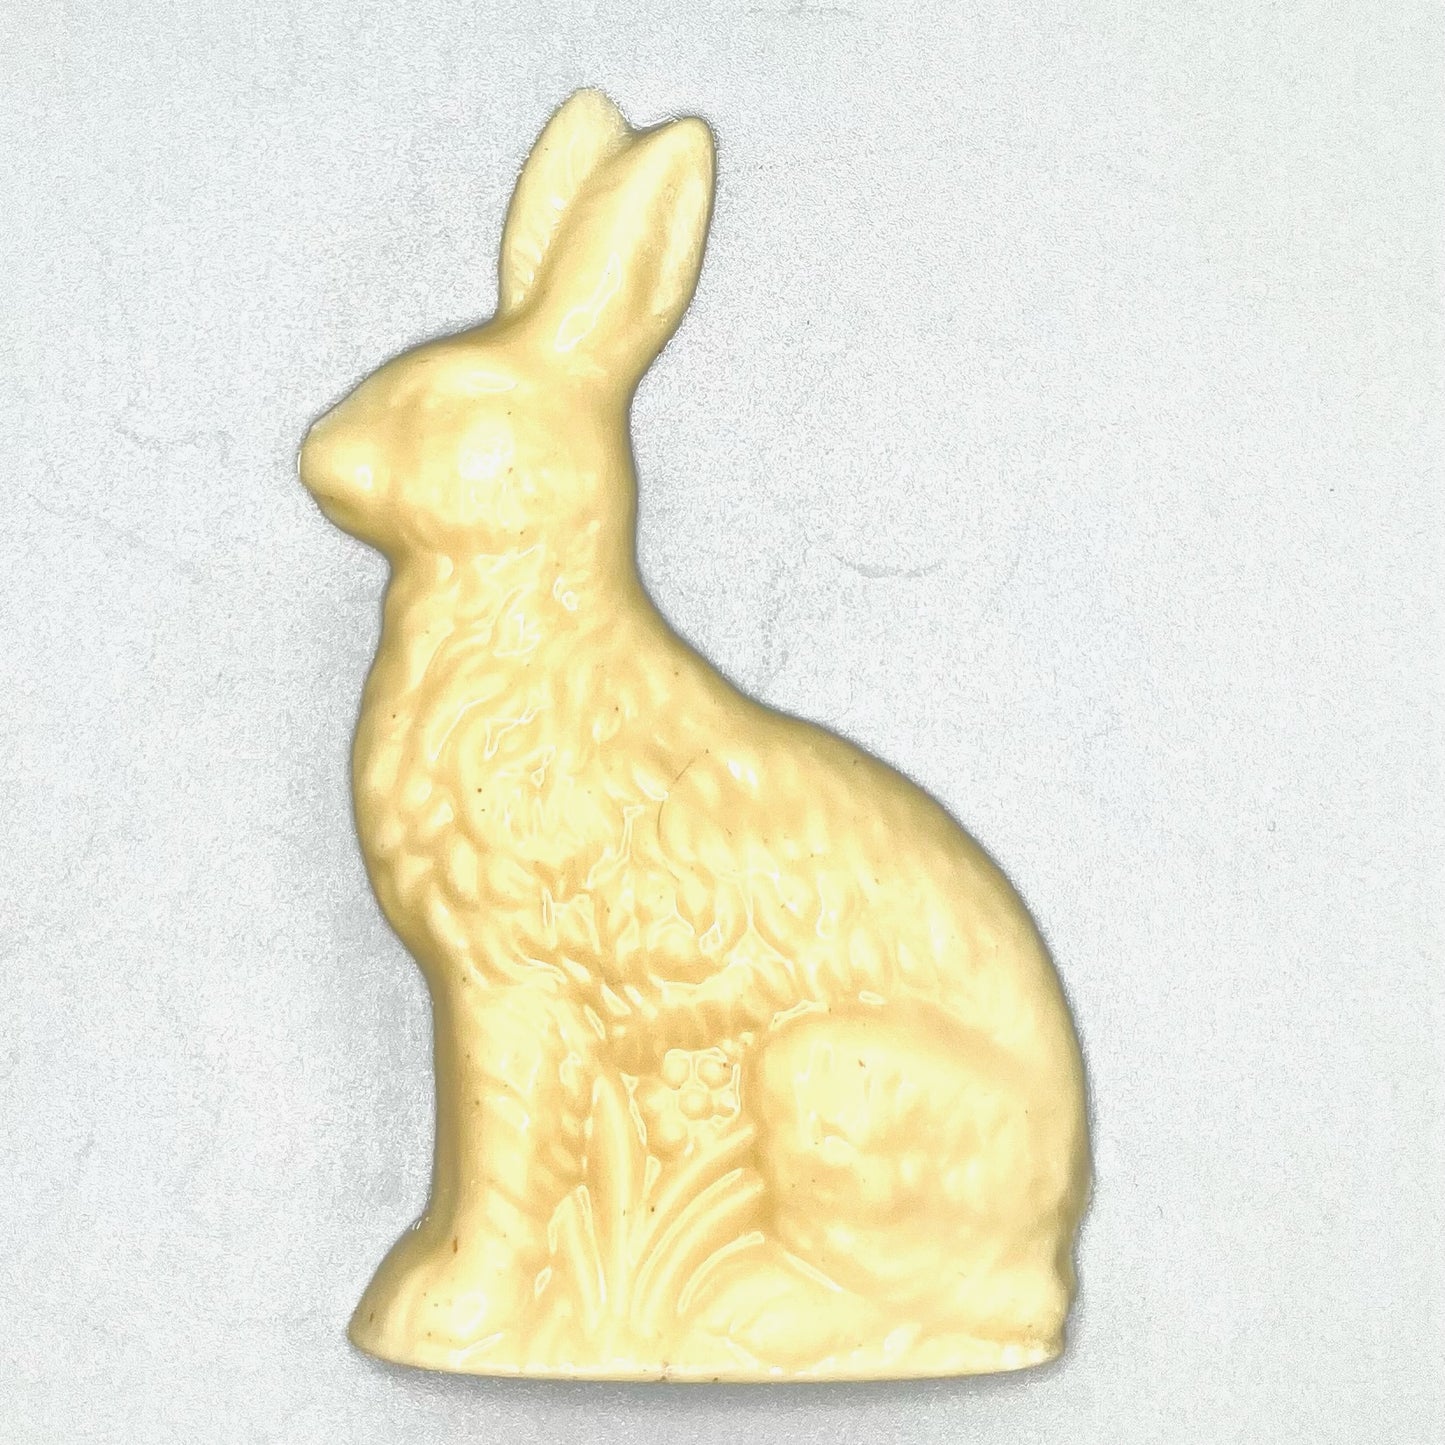 Solid Chocolate Bunny - available in 2 delicious options: Pascha White or 64% Dark Chocolate